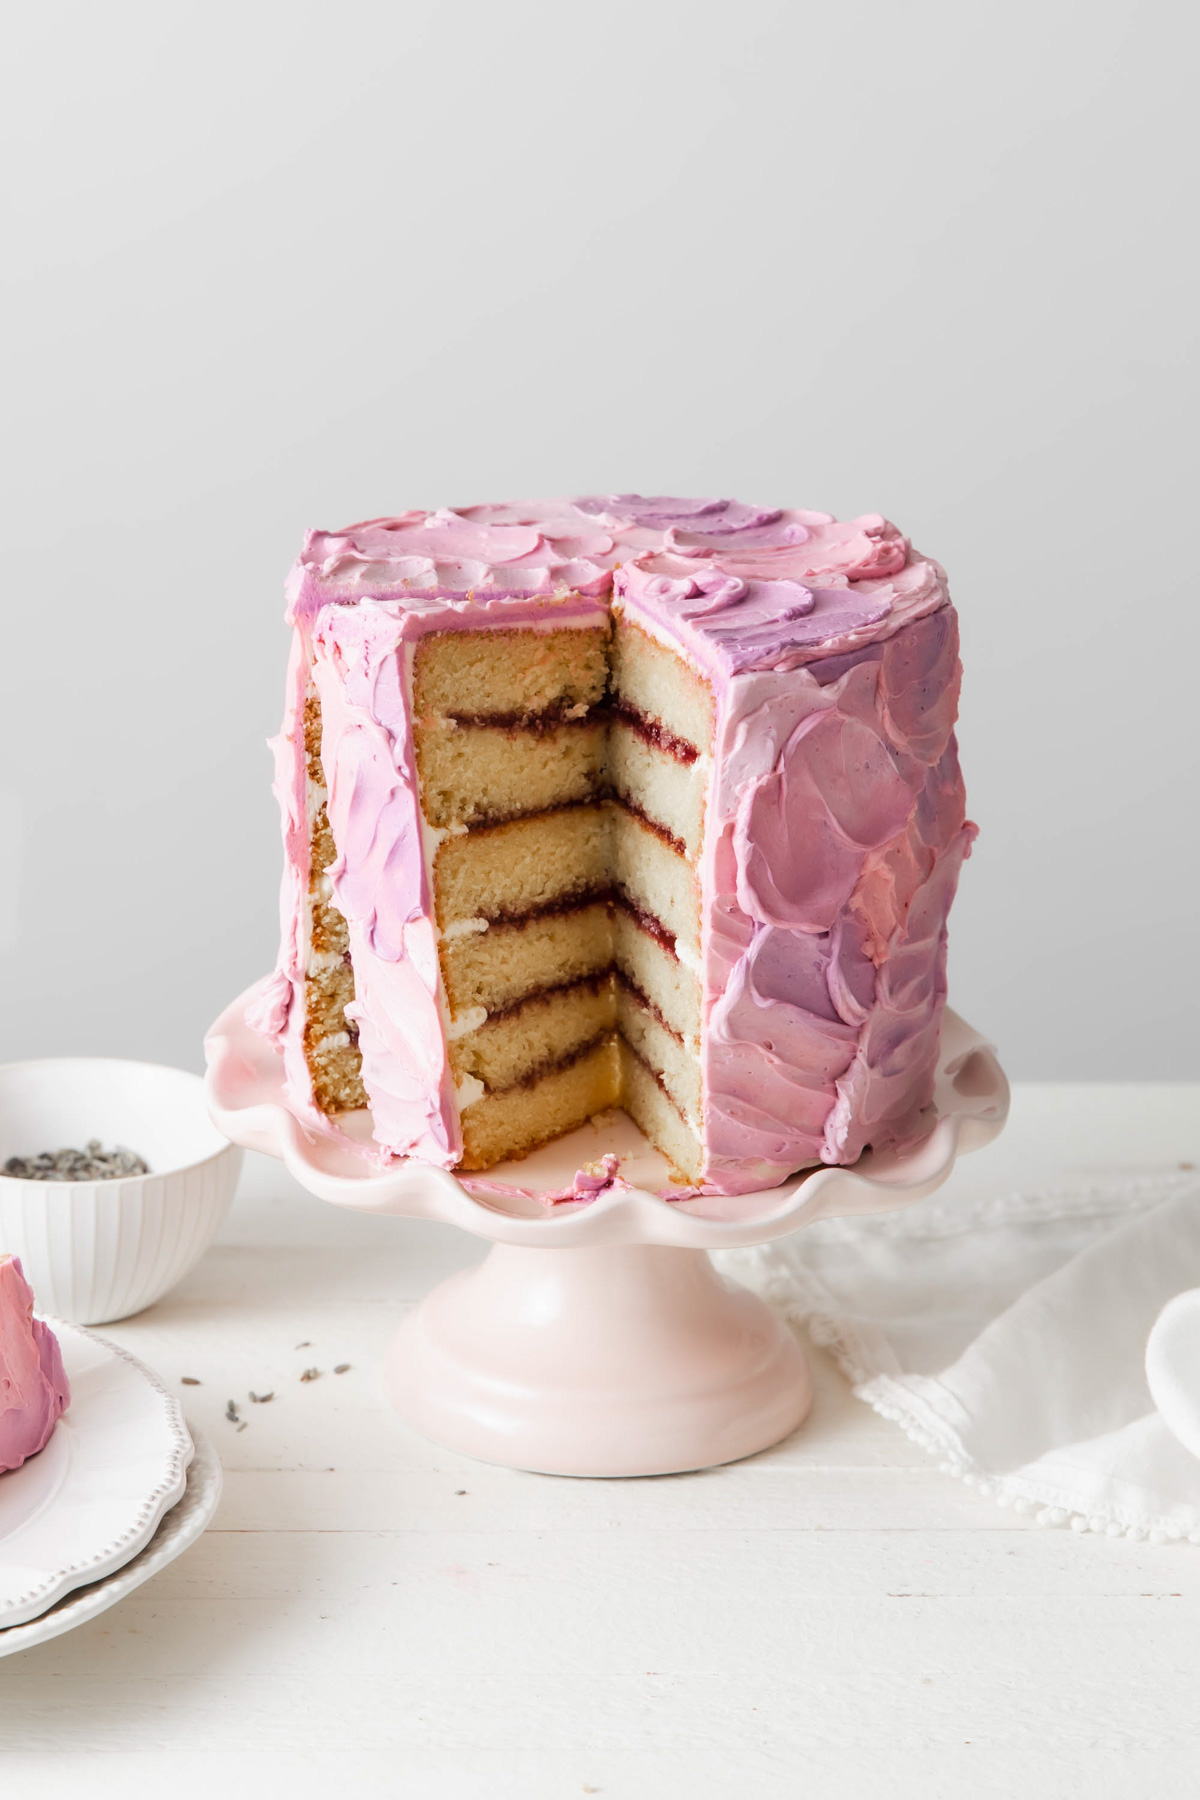 6-layer blackberry lavender cake on a pedestal that has been sliced